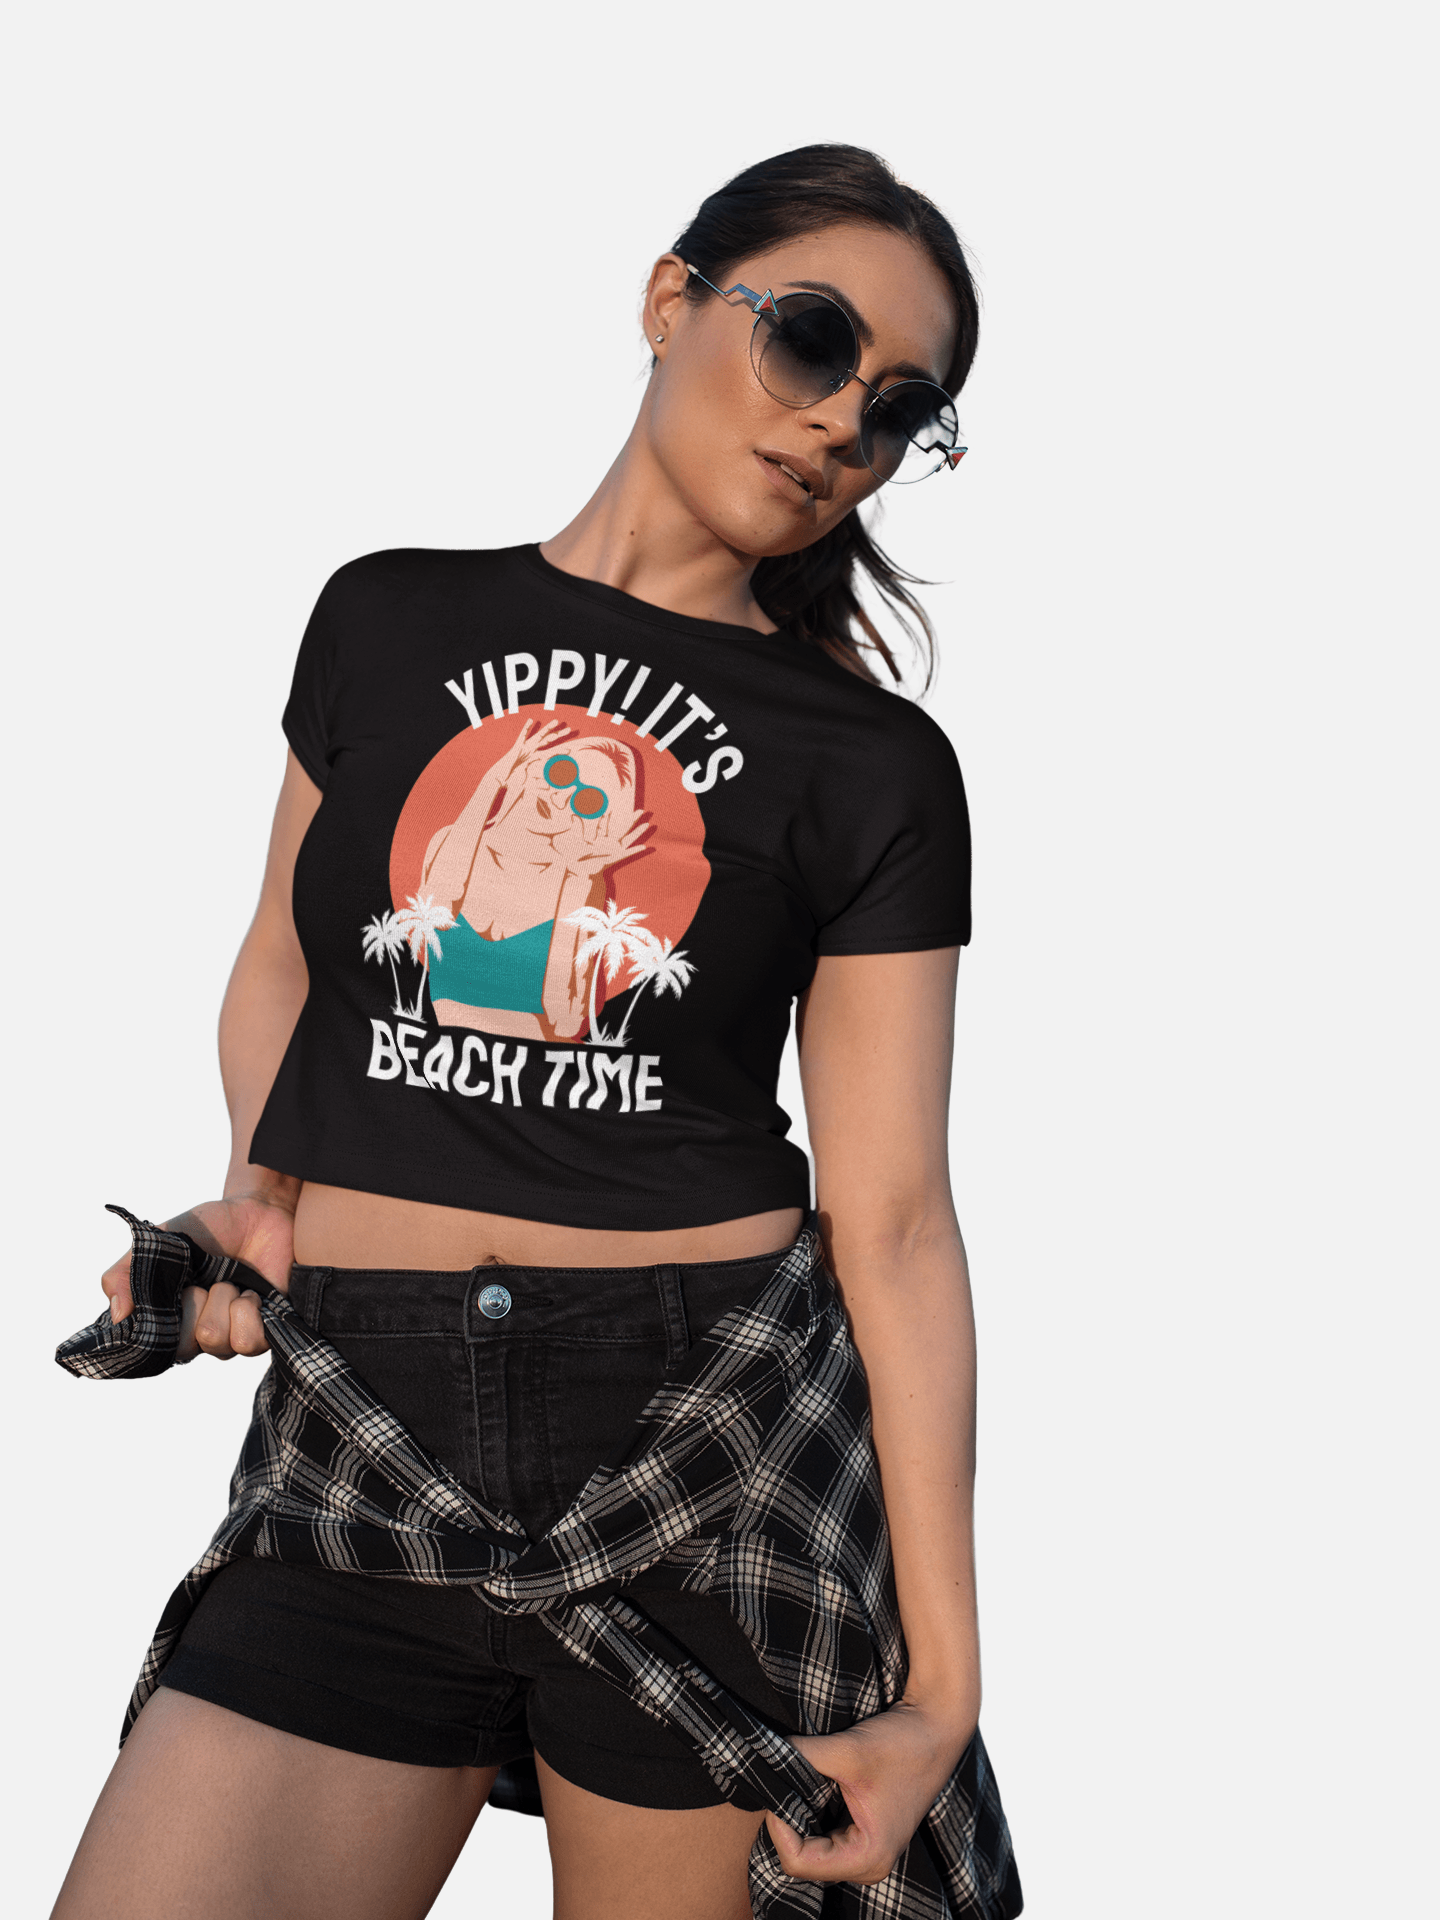 Yippie! Its Beach Time Black Crop Top For Women - ATOM